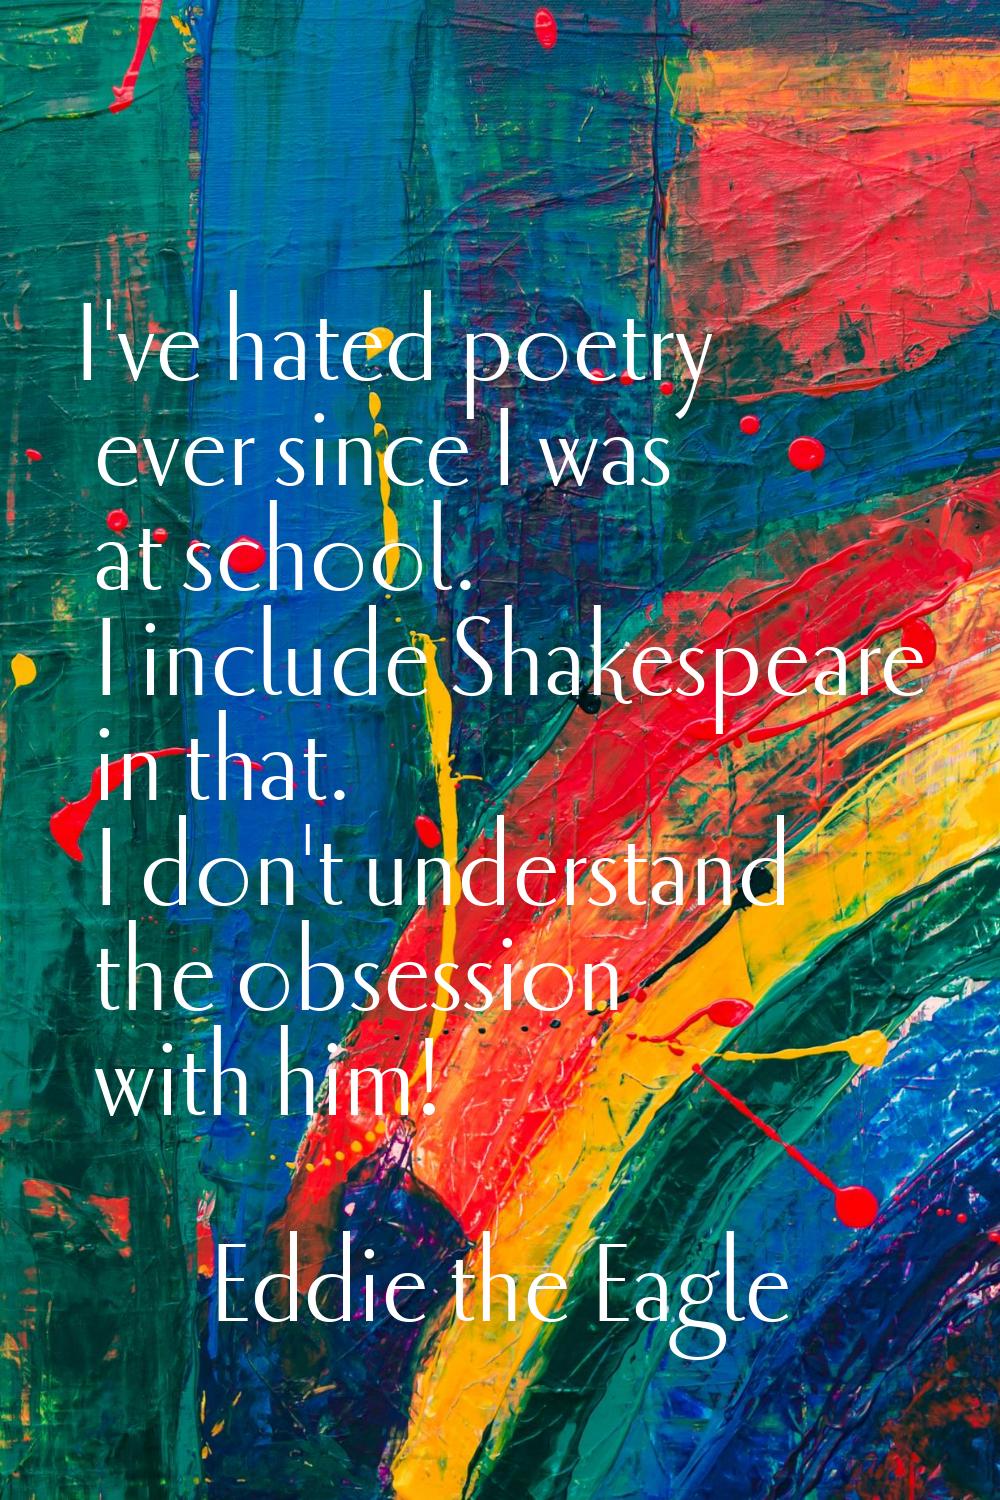 I've hated poetry ever since I was at school. I include Shakespeare in that. I don't understand the